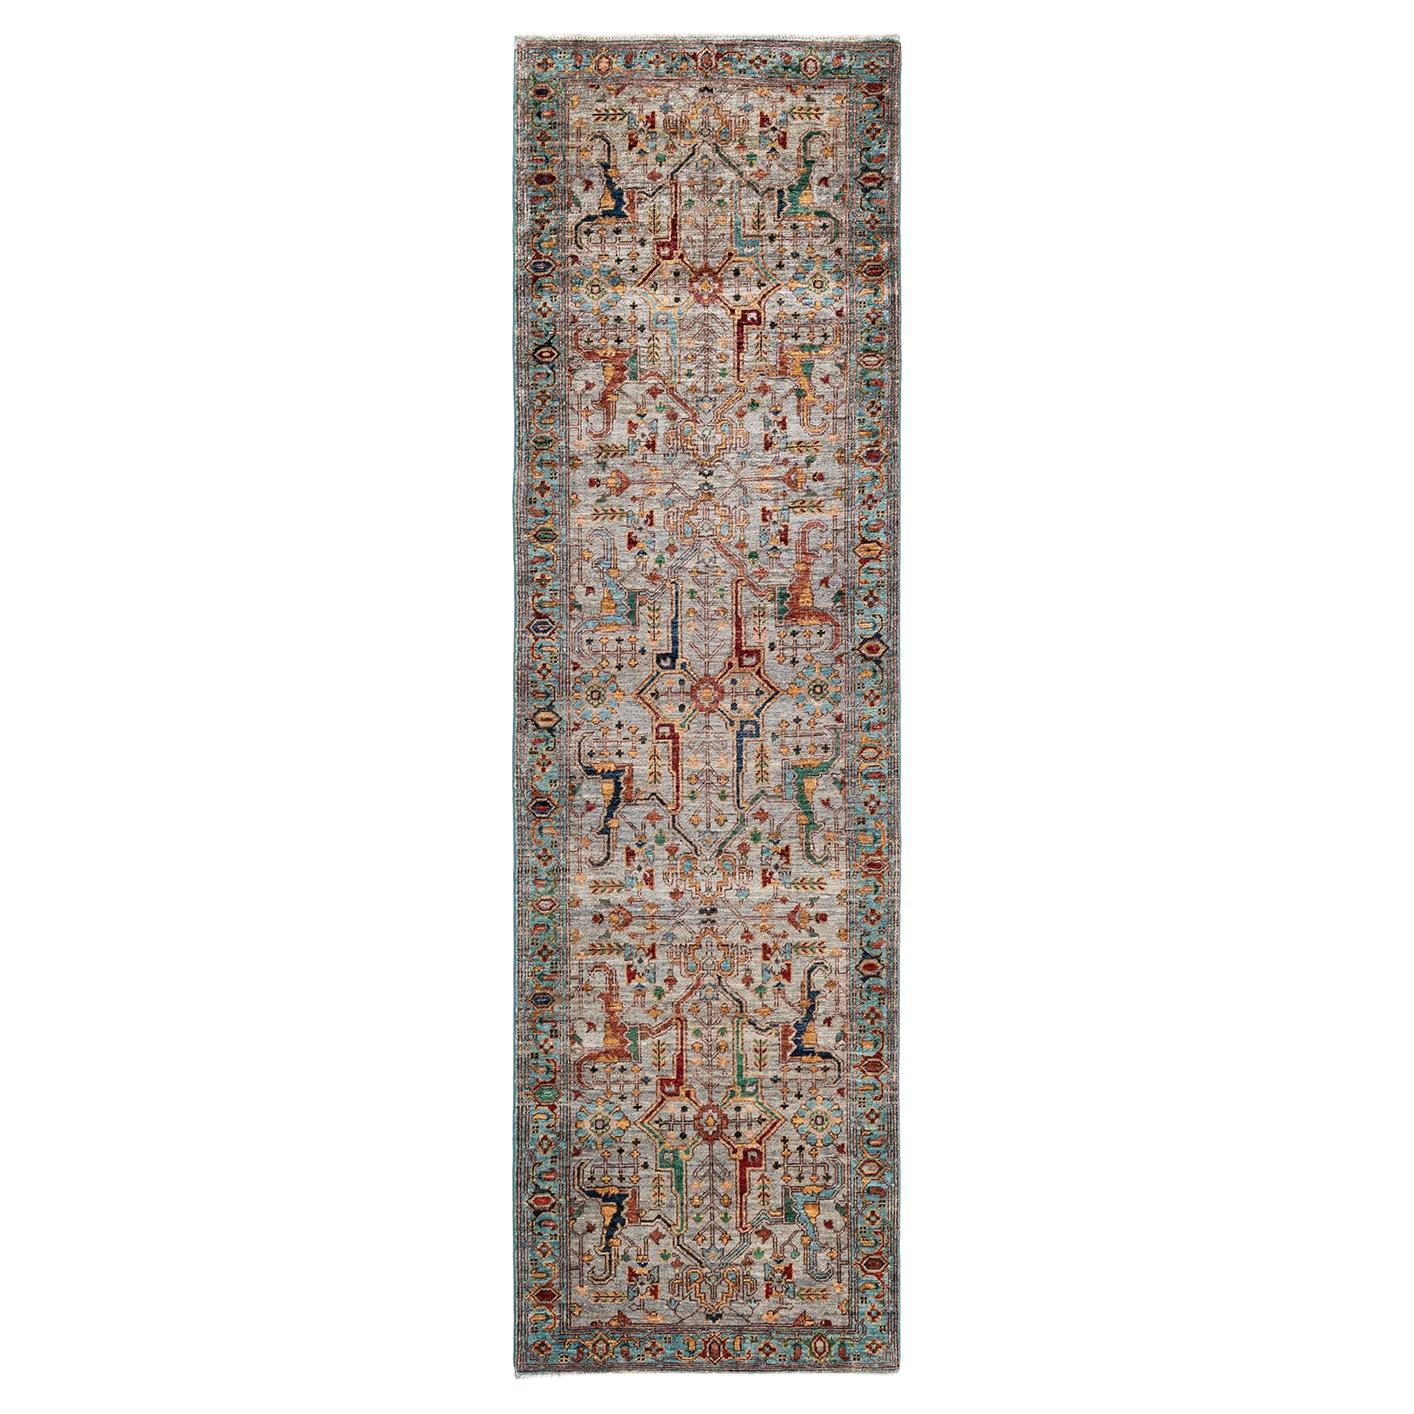 Serapi, One-of-a-kind Hand-Knotted Runner Rug